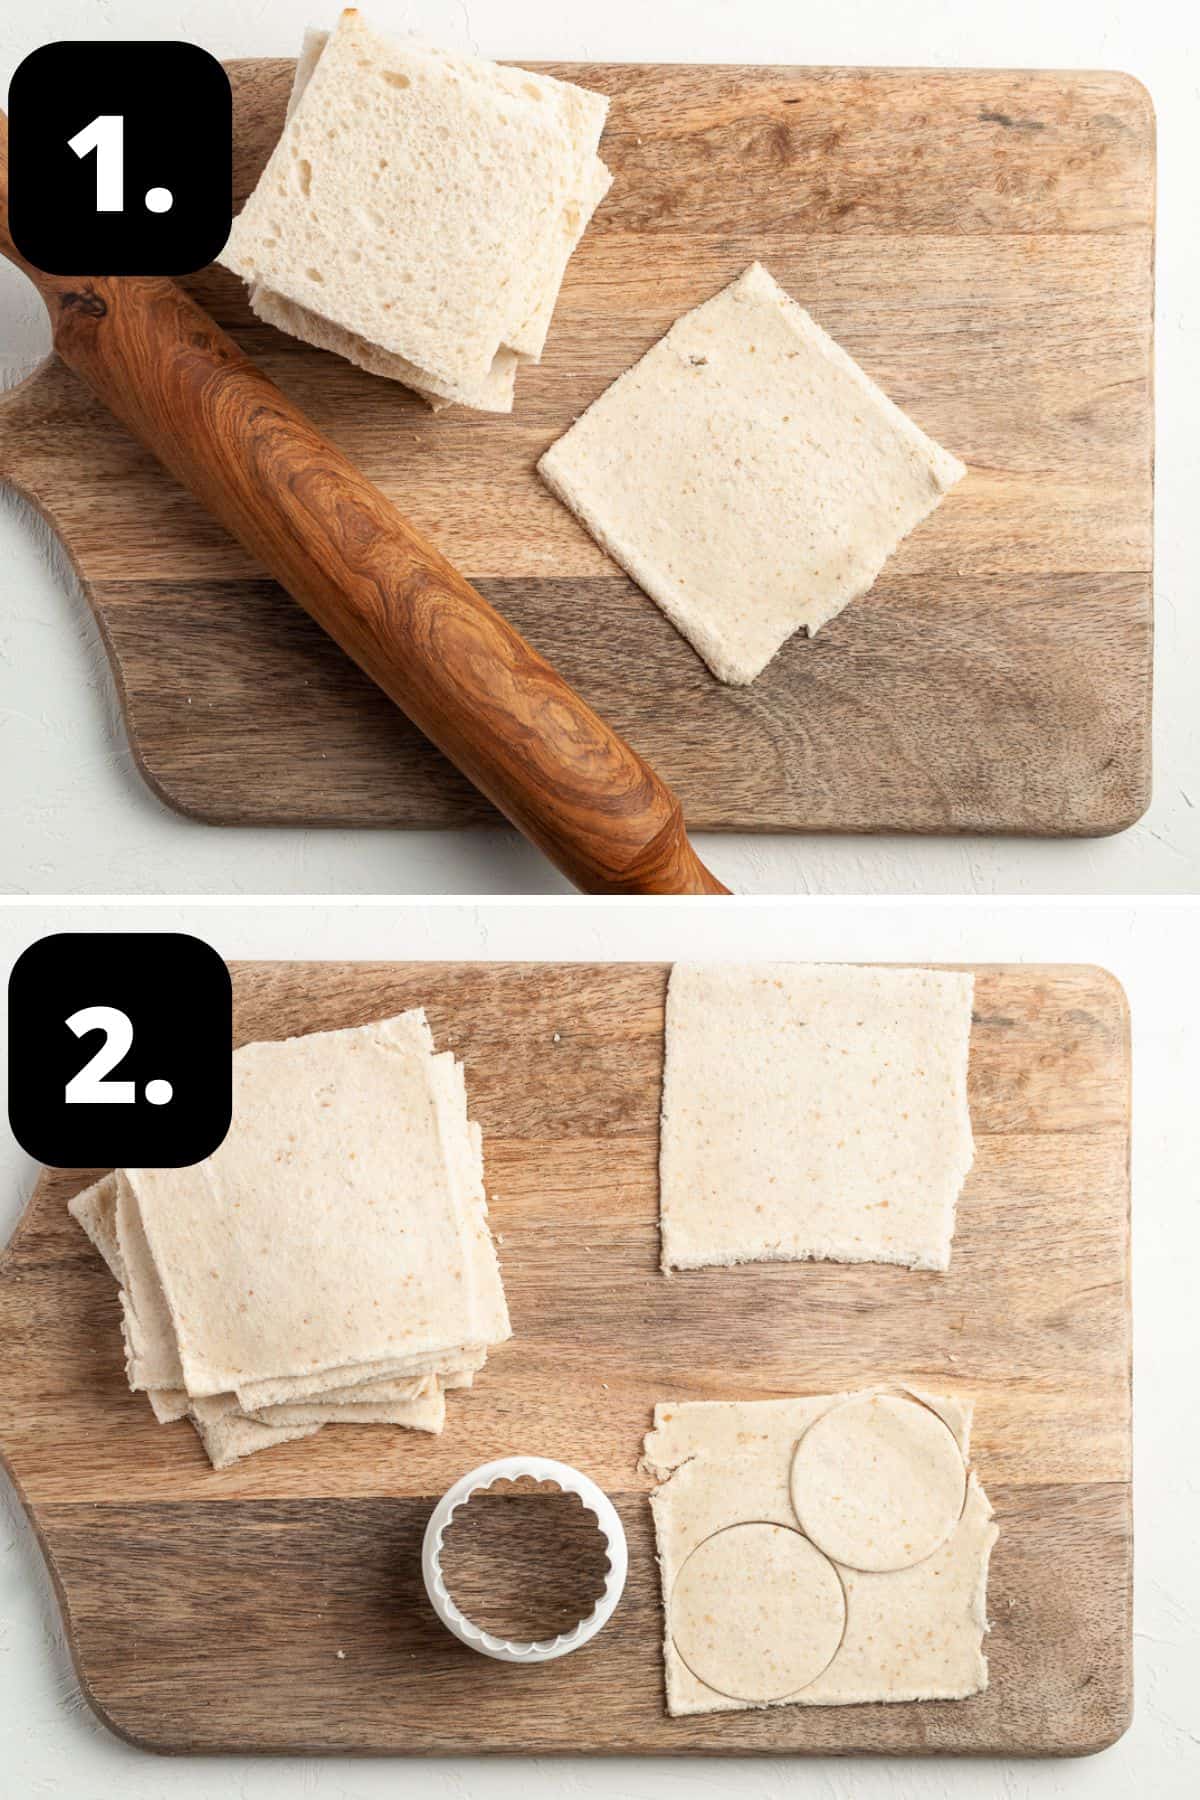 Steps 1-2 of preparing this recipe - the bread with the crusts removed and the rolled bread being cut into circles.